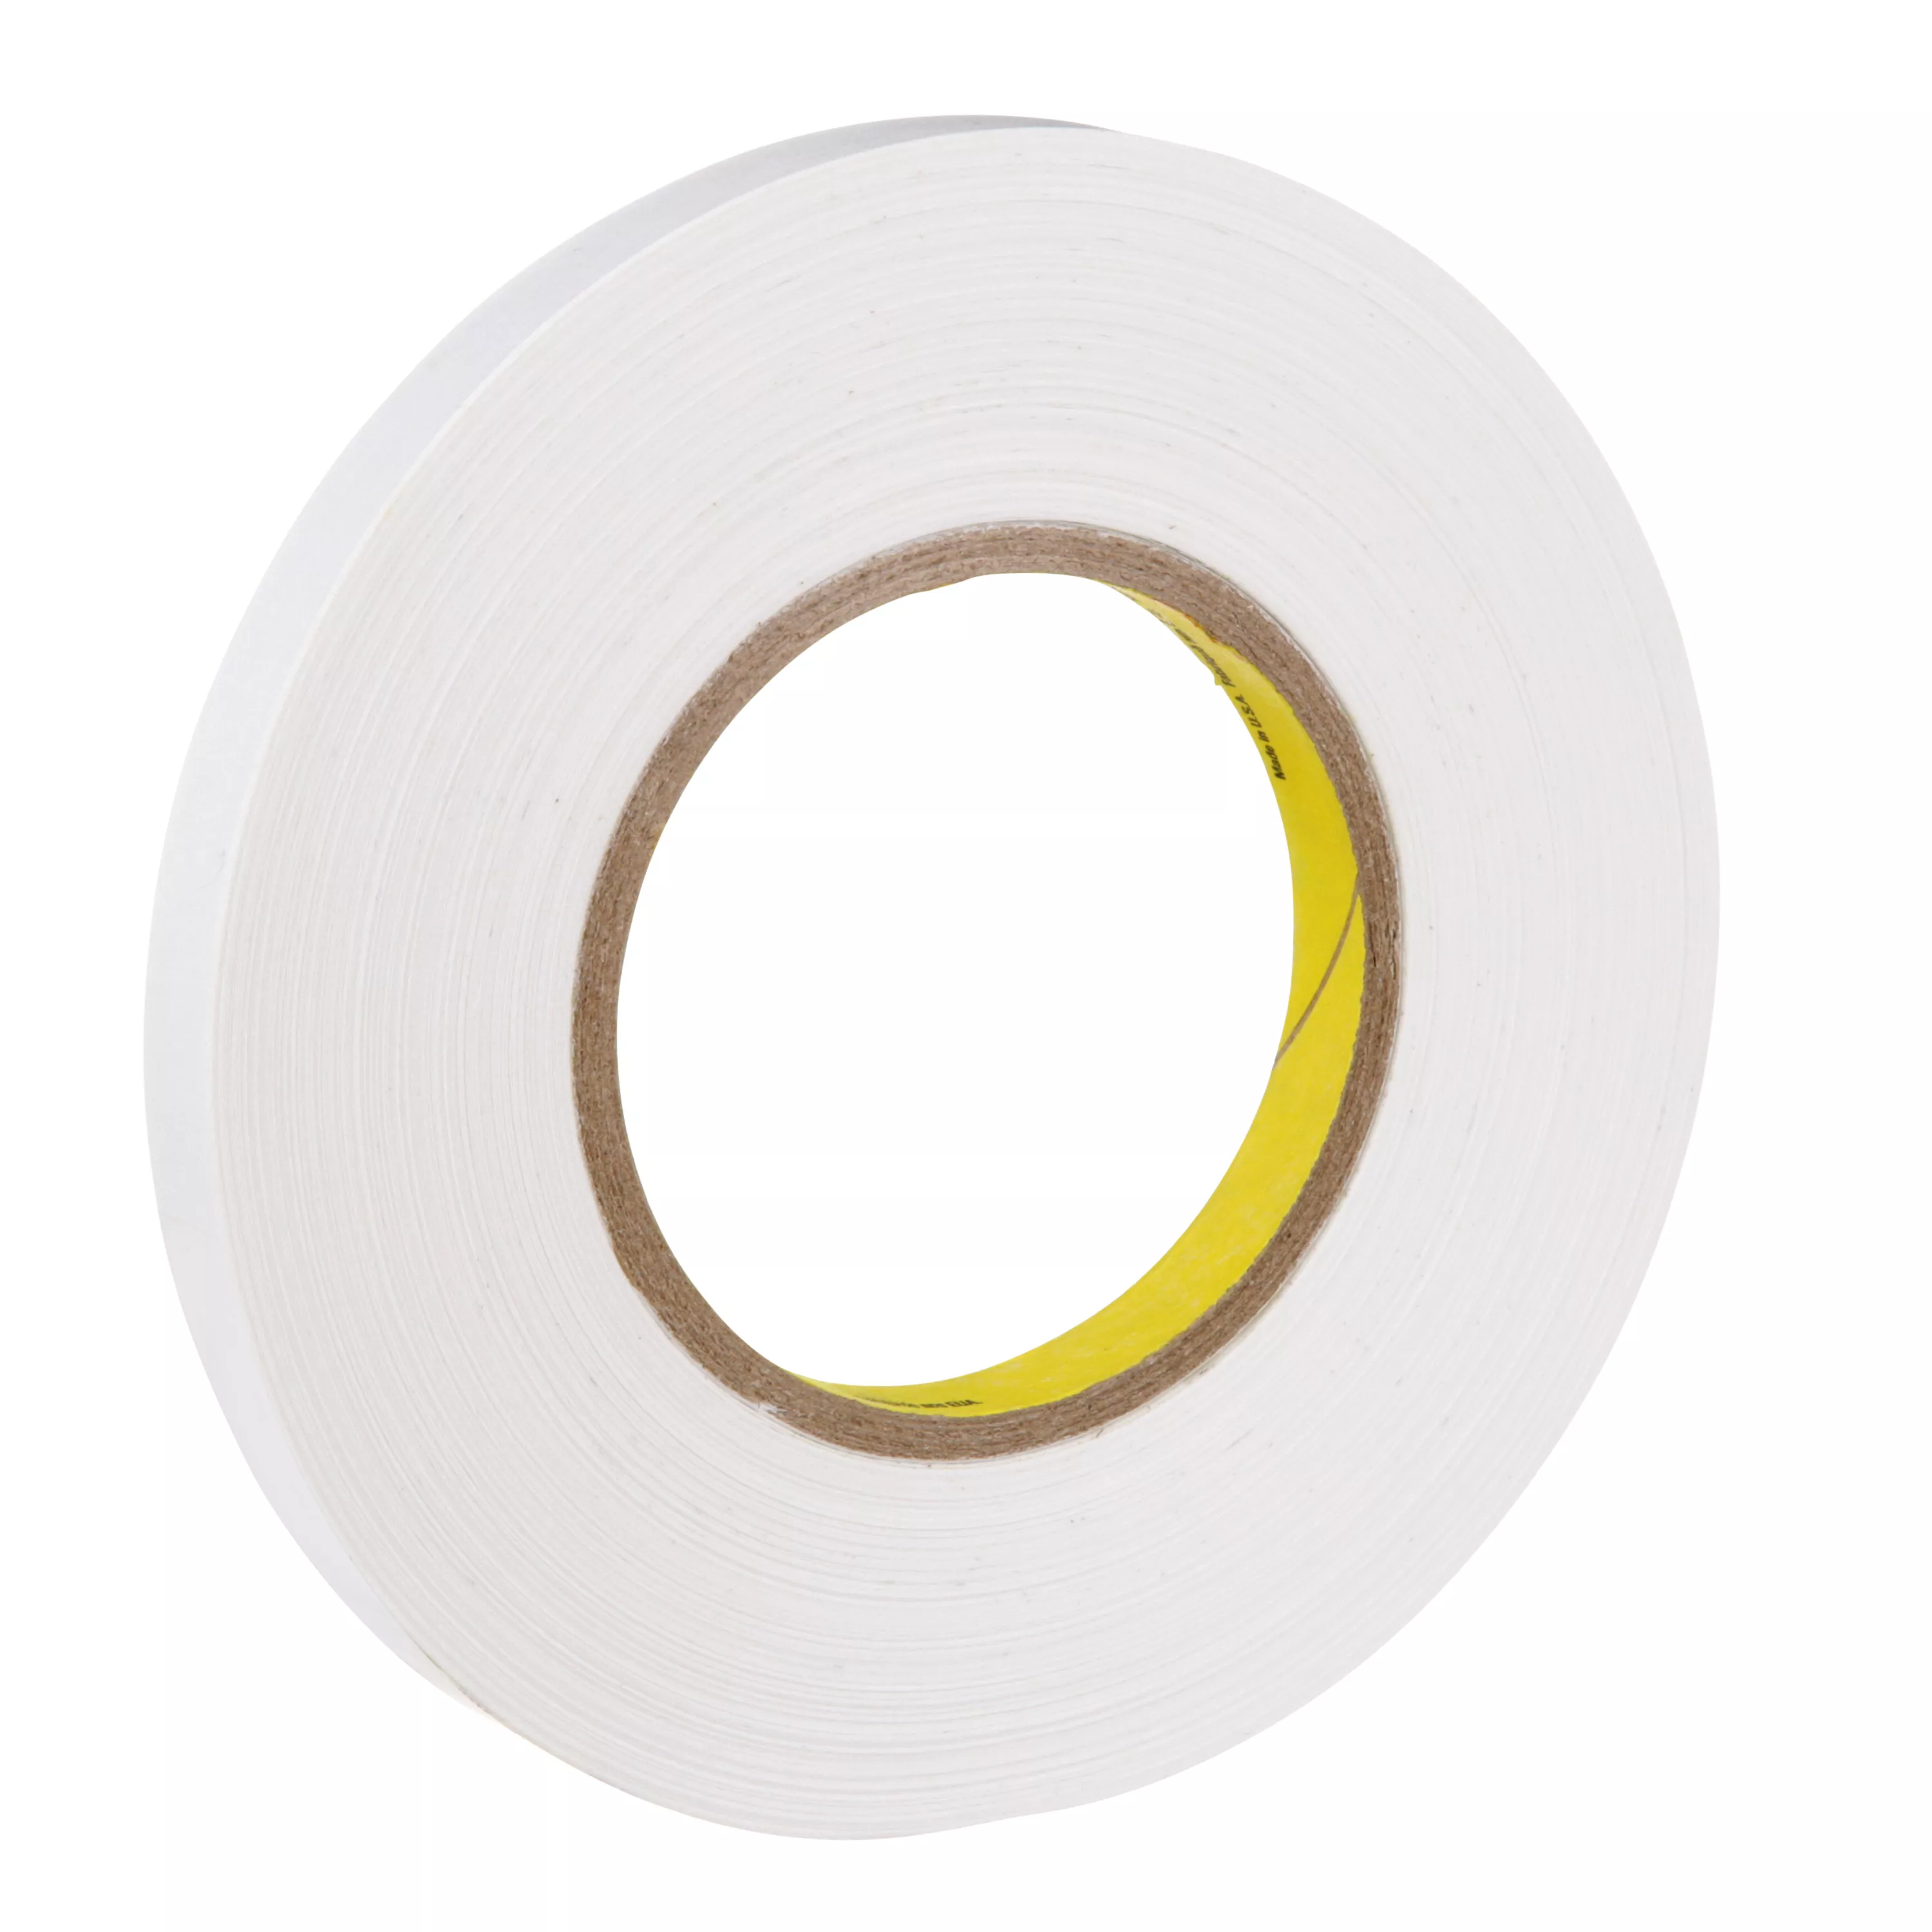 3M™ Removable Repositionable Tape 9416, White, 3/4 in x 72 yd, 2.6 mil,
48 Roll/Case